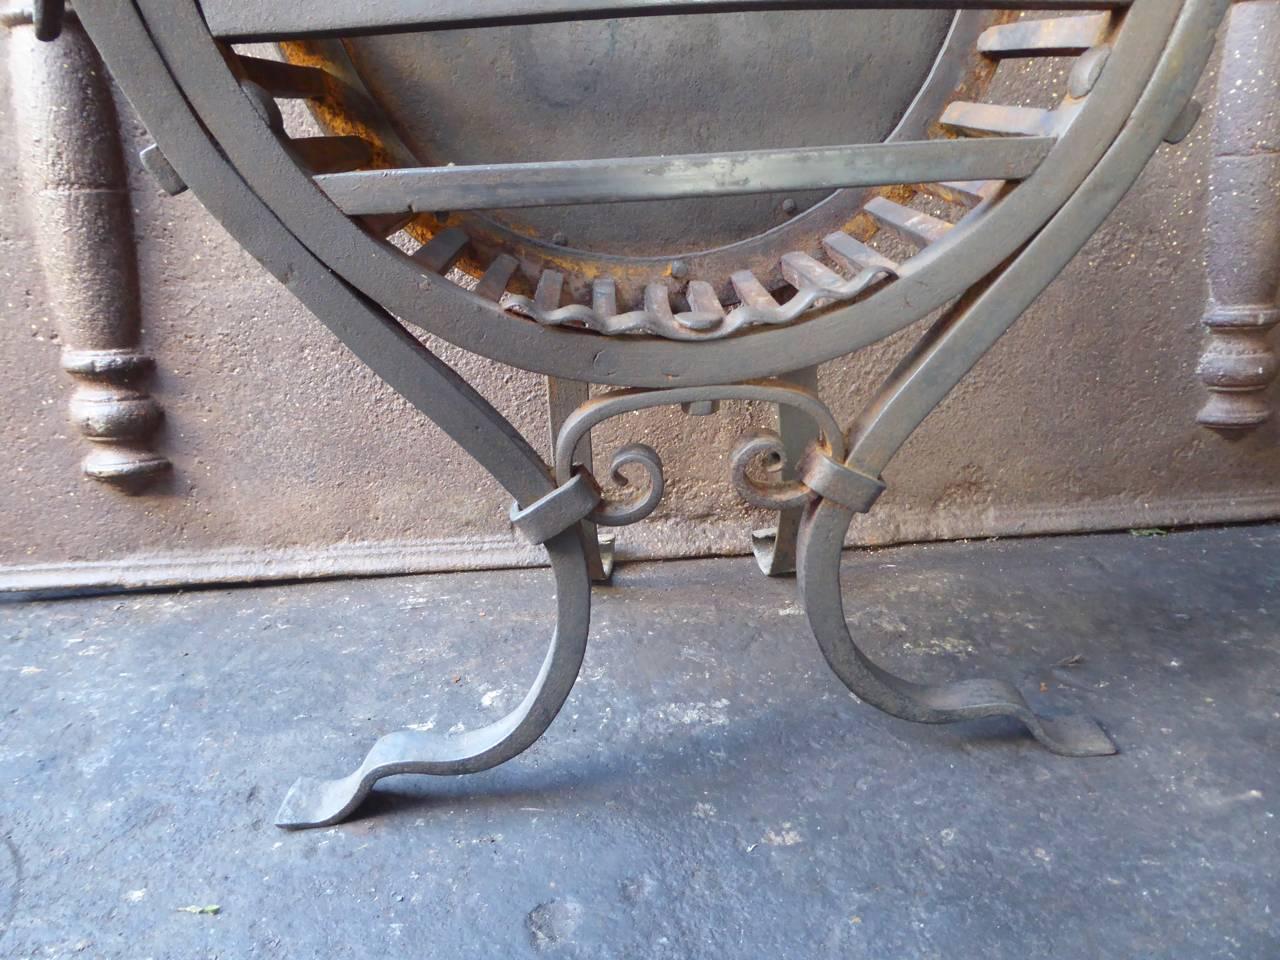 19th-20th Century English Fireplace Grate or Fire Basket 2